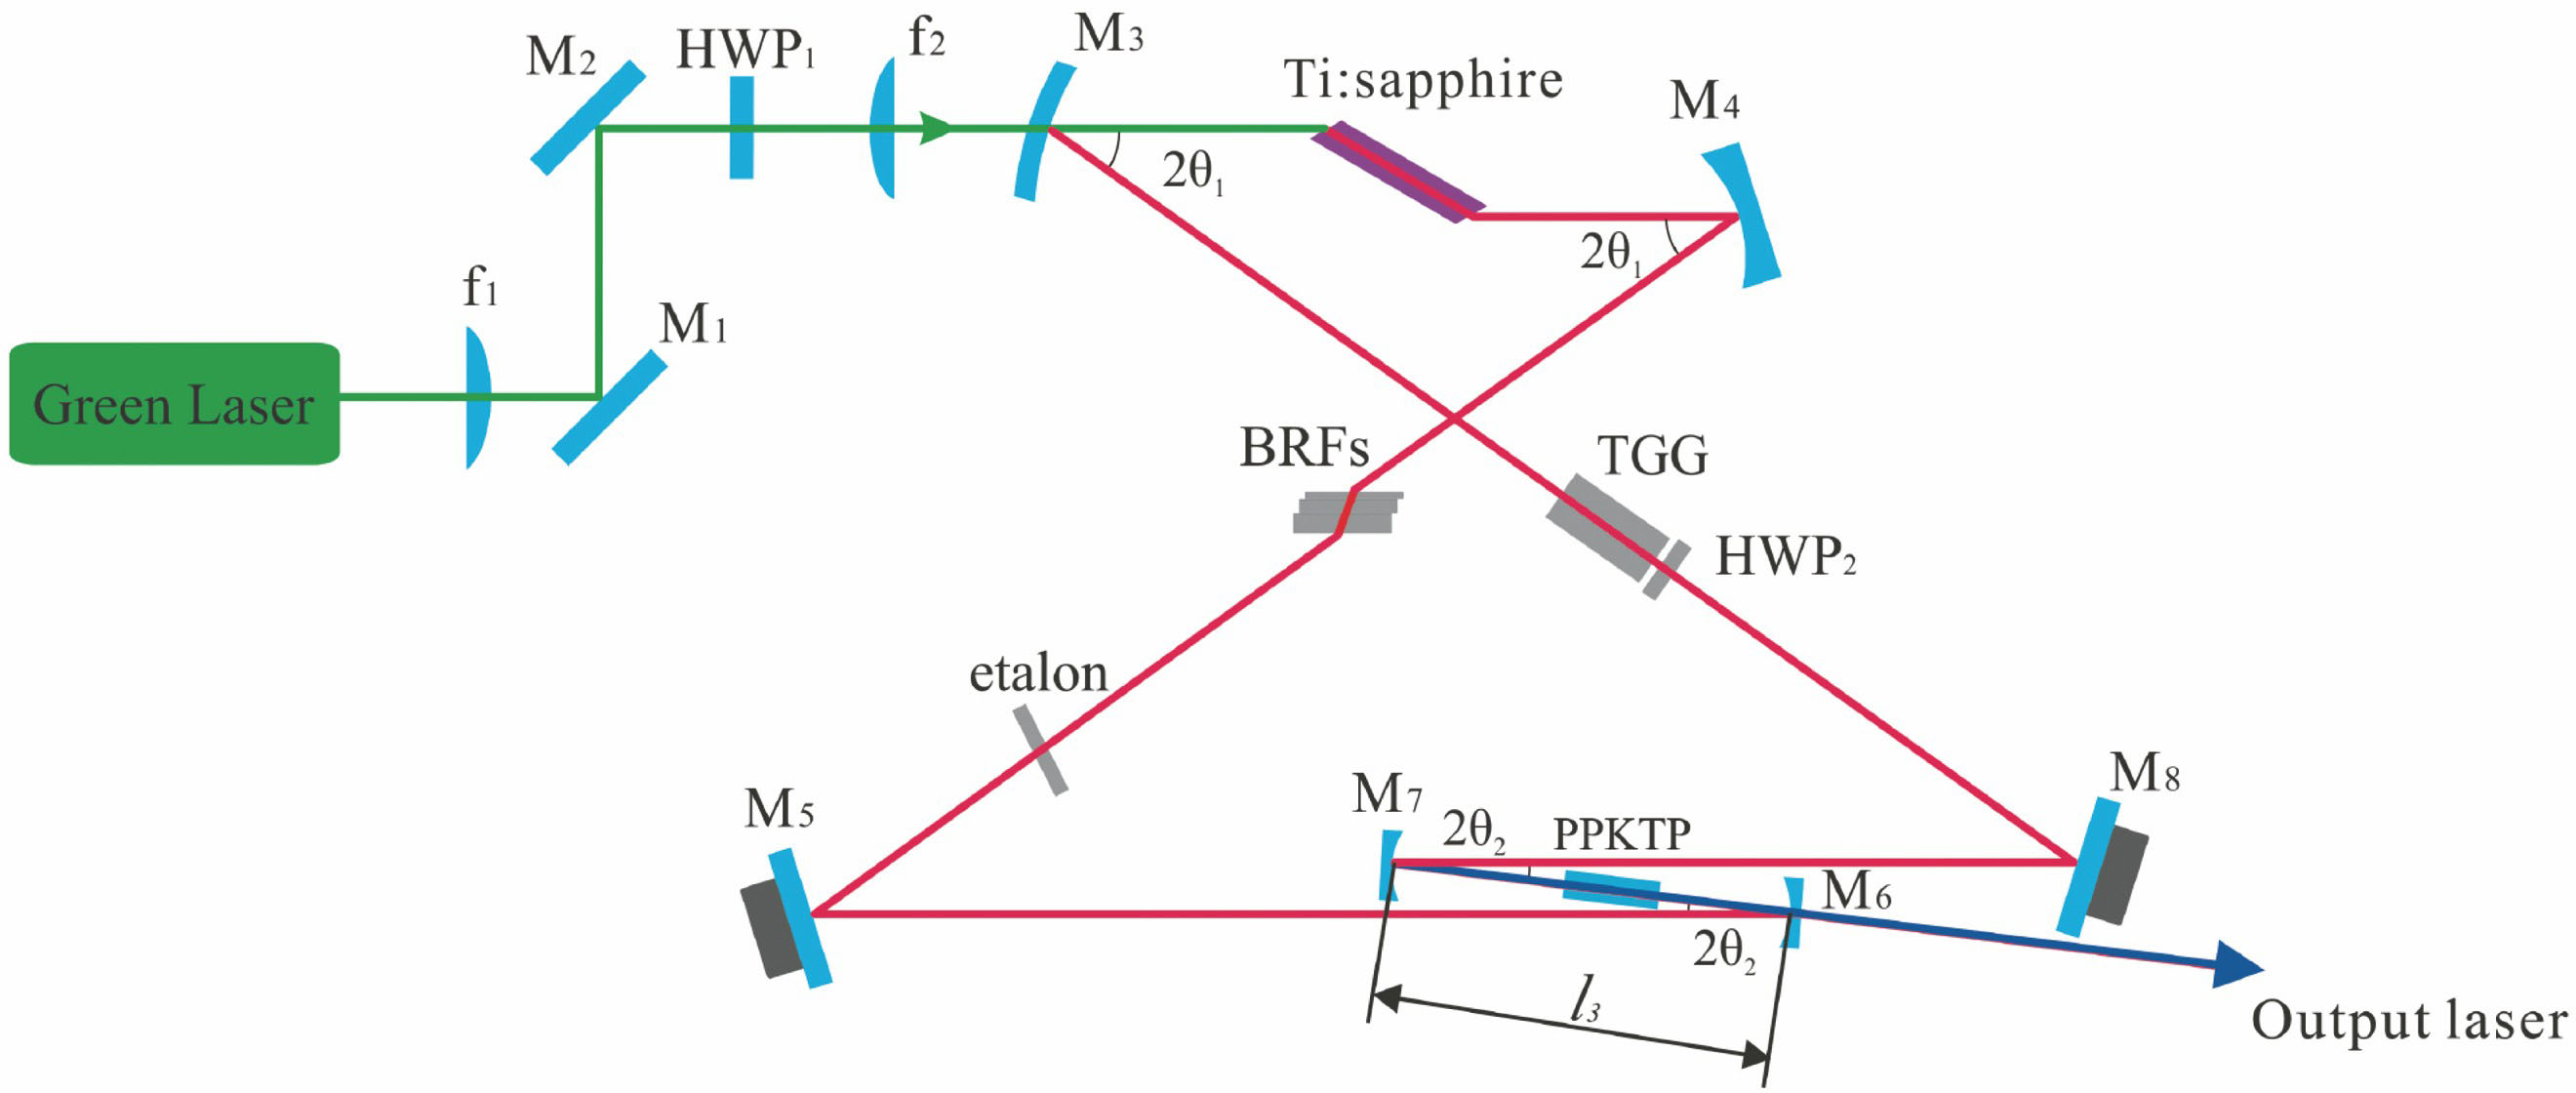 Experimental setup of the intracavity SHG single-frequency Ti∶sapphire/PPKTP blue laser[33]